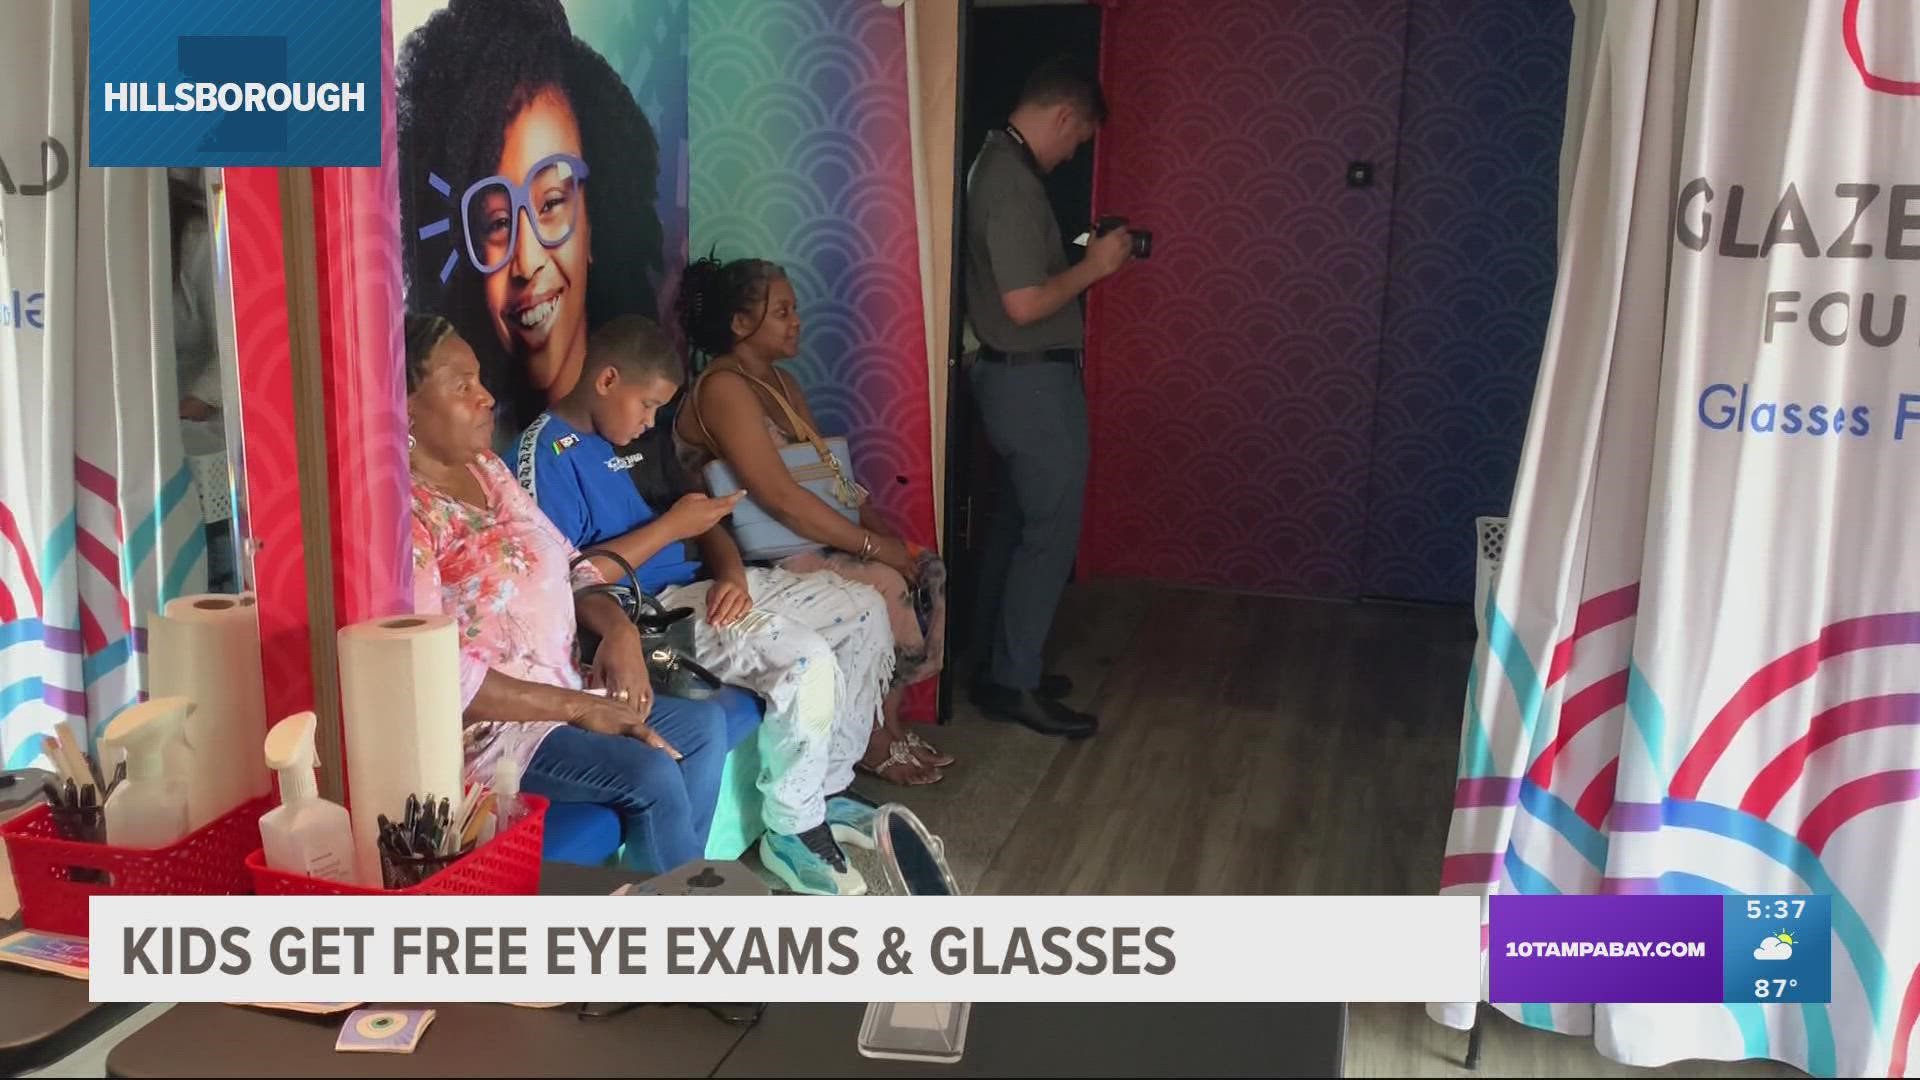 In June, some county tax collector locations will partner with two local organizations to provide the free eye services to children ages 5 to 17.